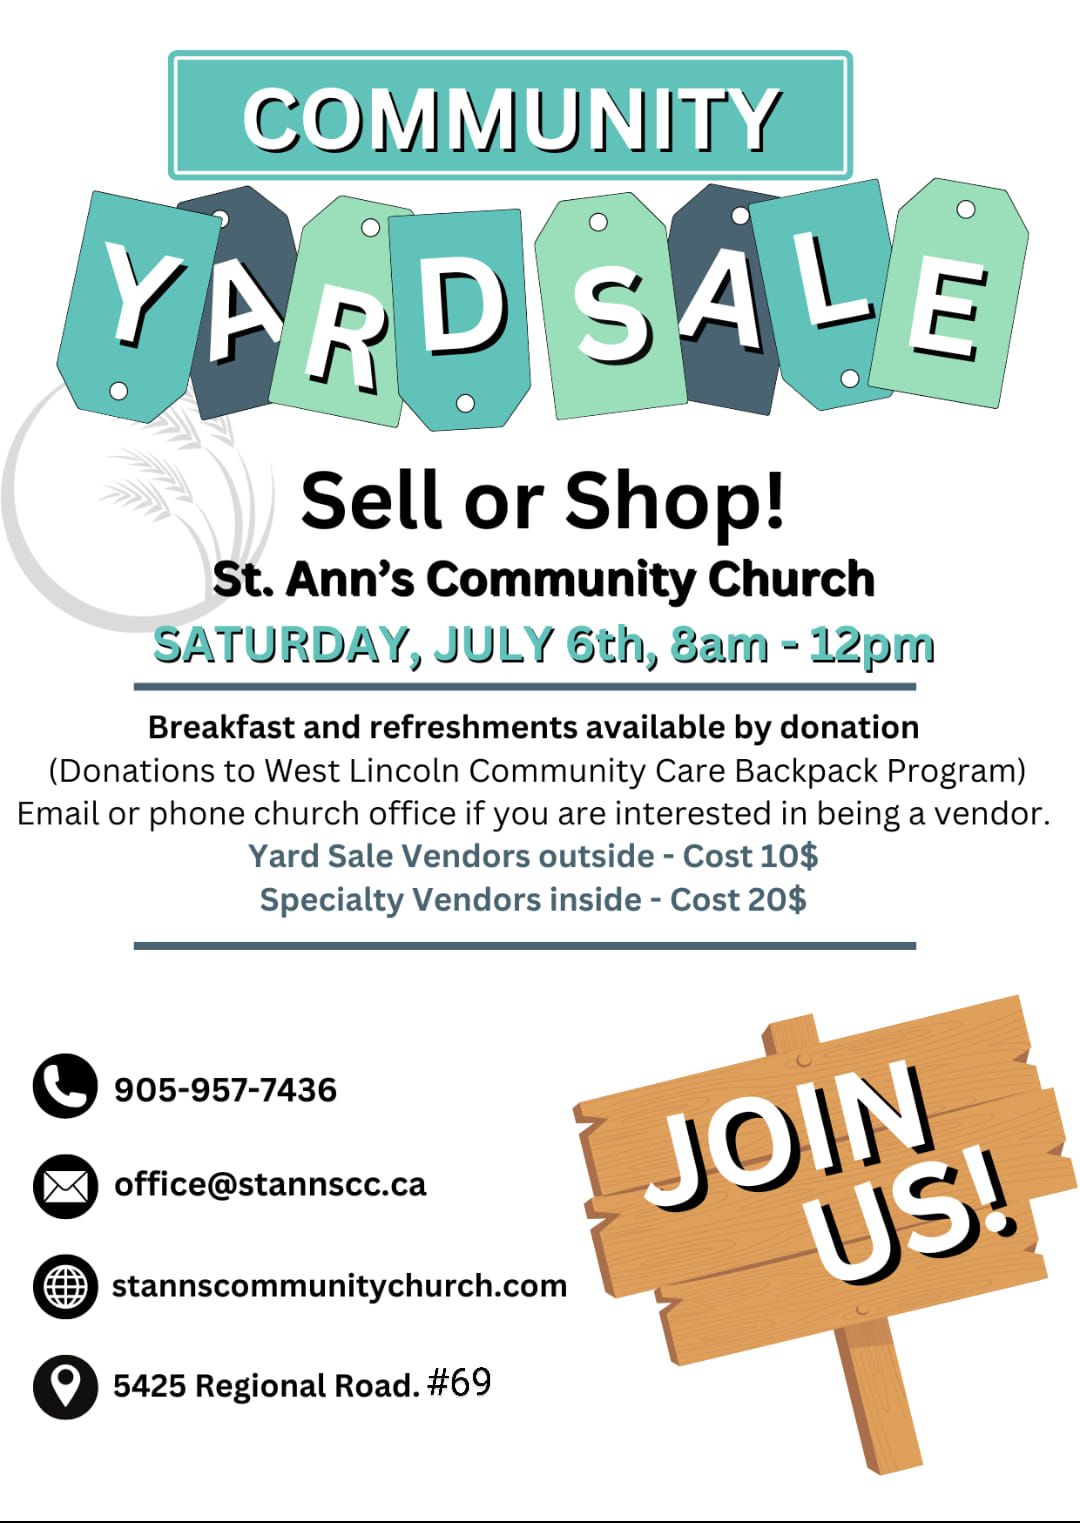 Community Yard Sale and Vendors Event